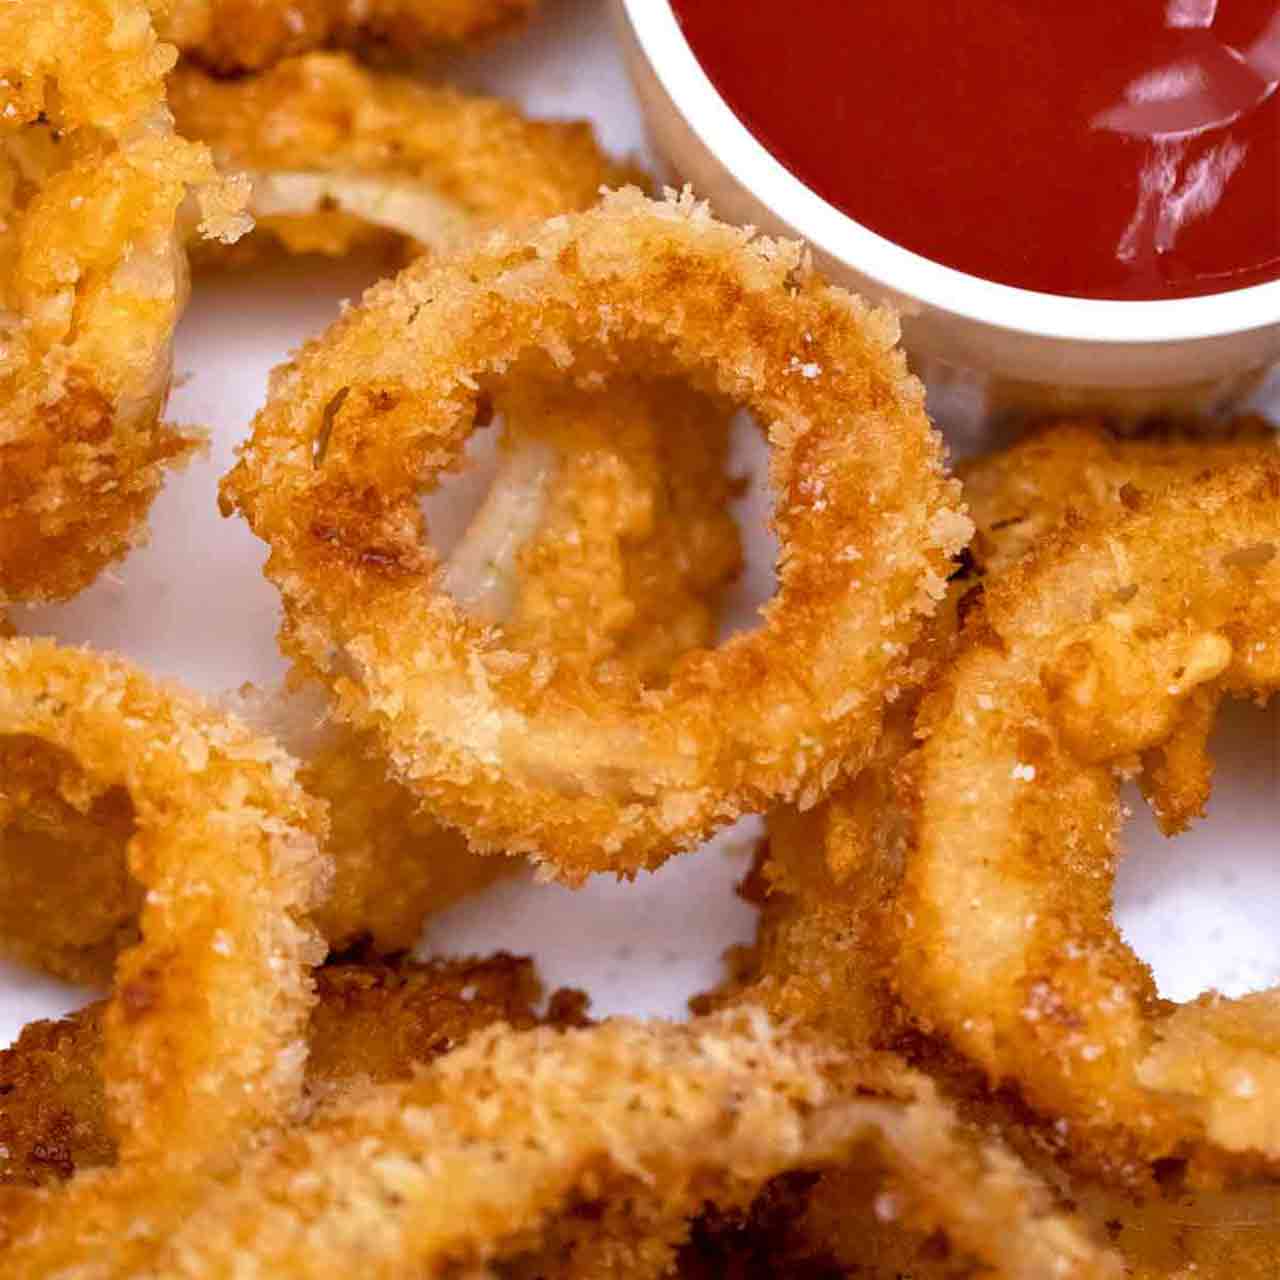 onion rings next to ketchup.